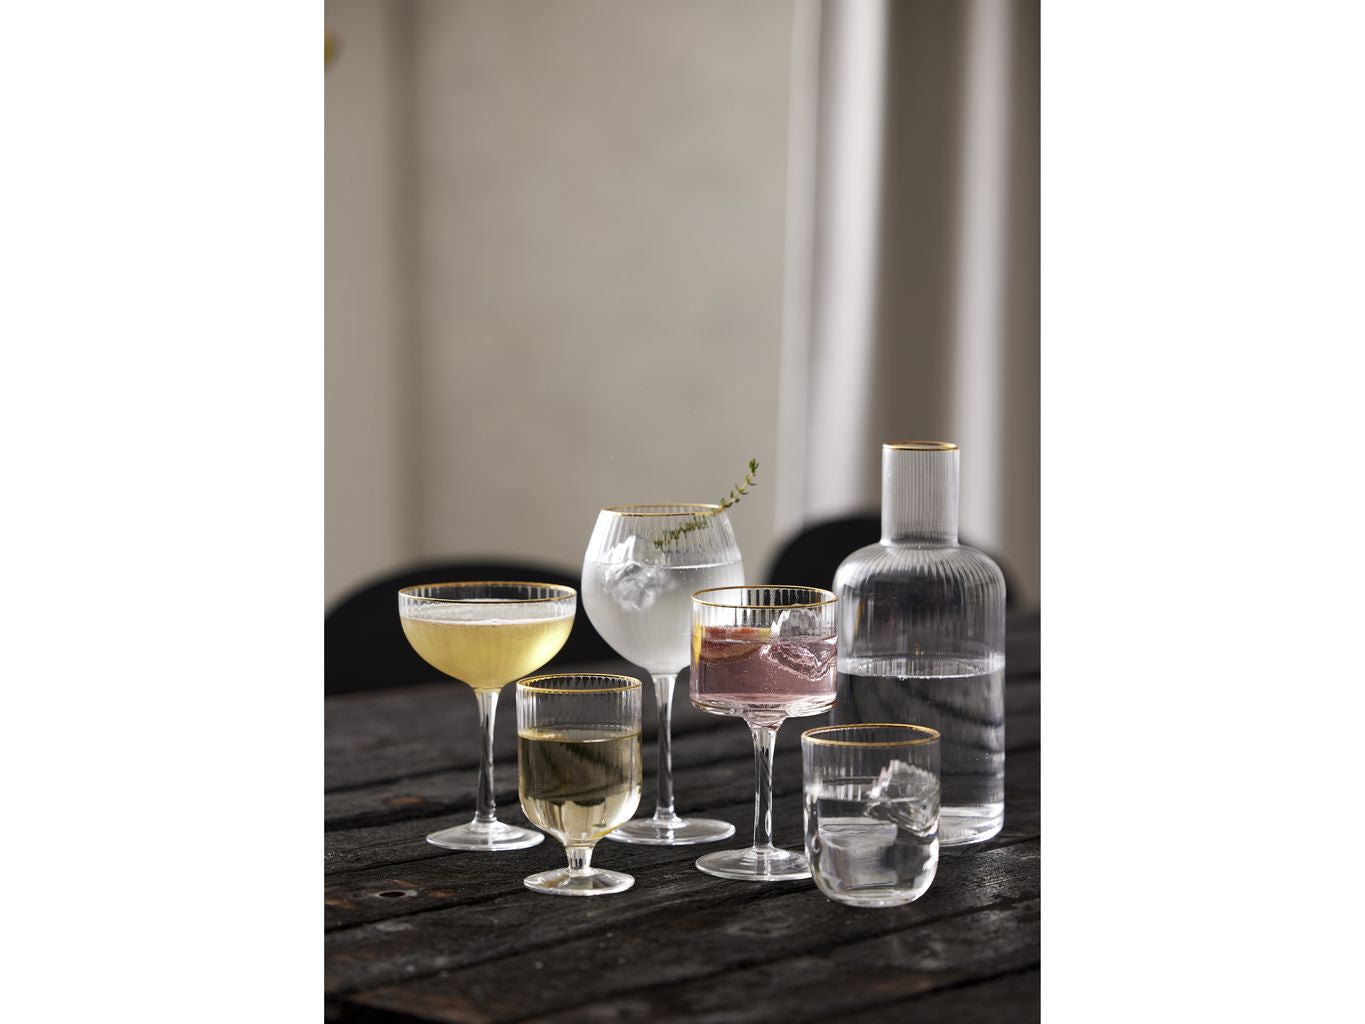 Lyngby Glas Palermo Gold Wine Verre 30 CL, 4 PCS.